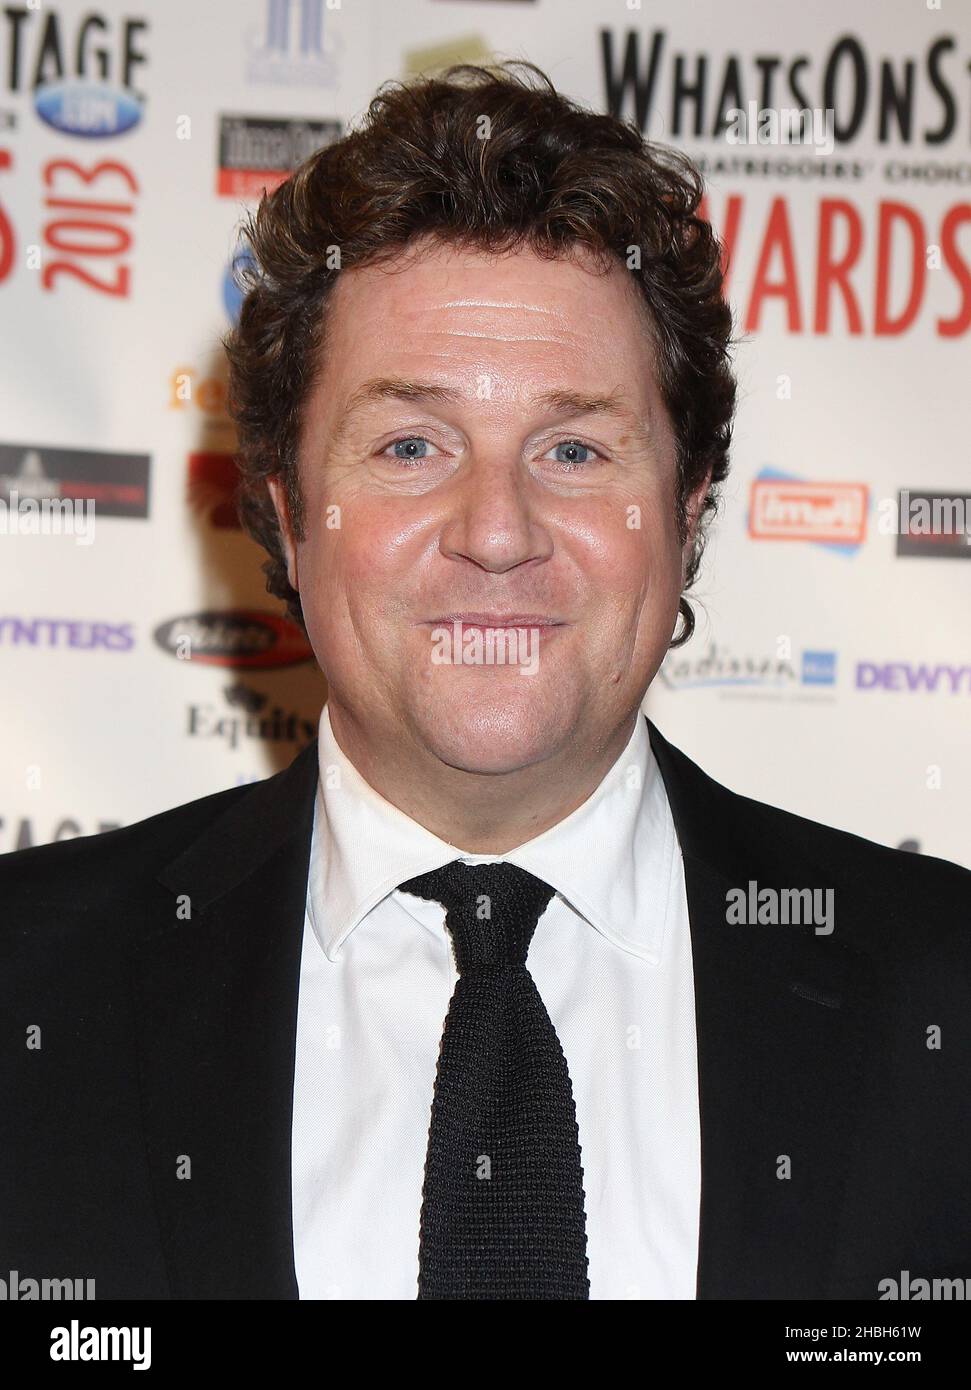 Michael Ball is Best Actor in a Musical at the Whatsonstage Awards at